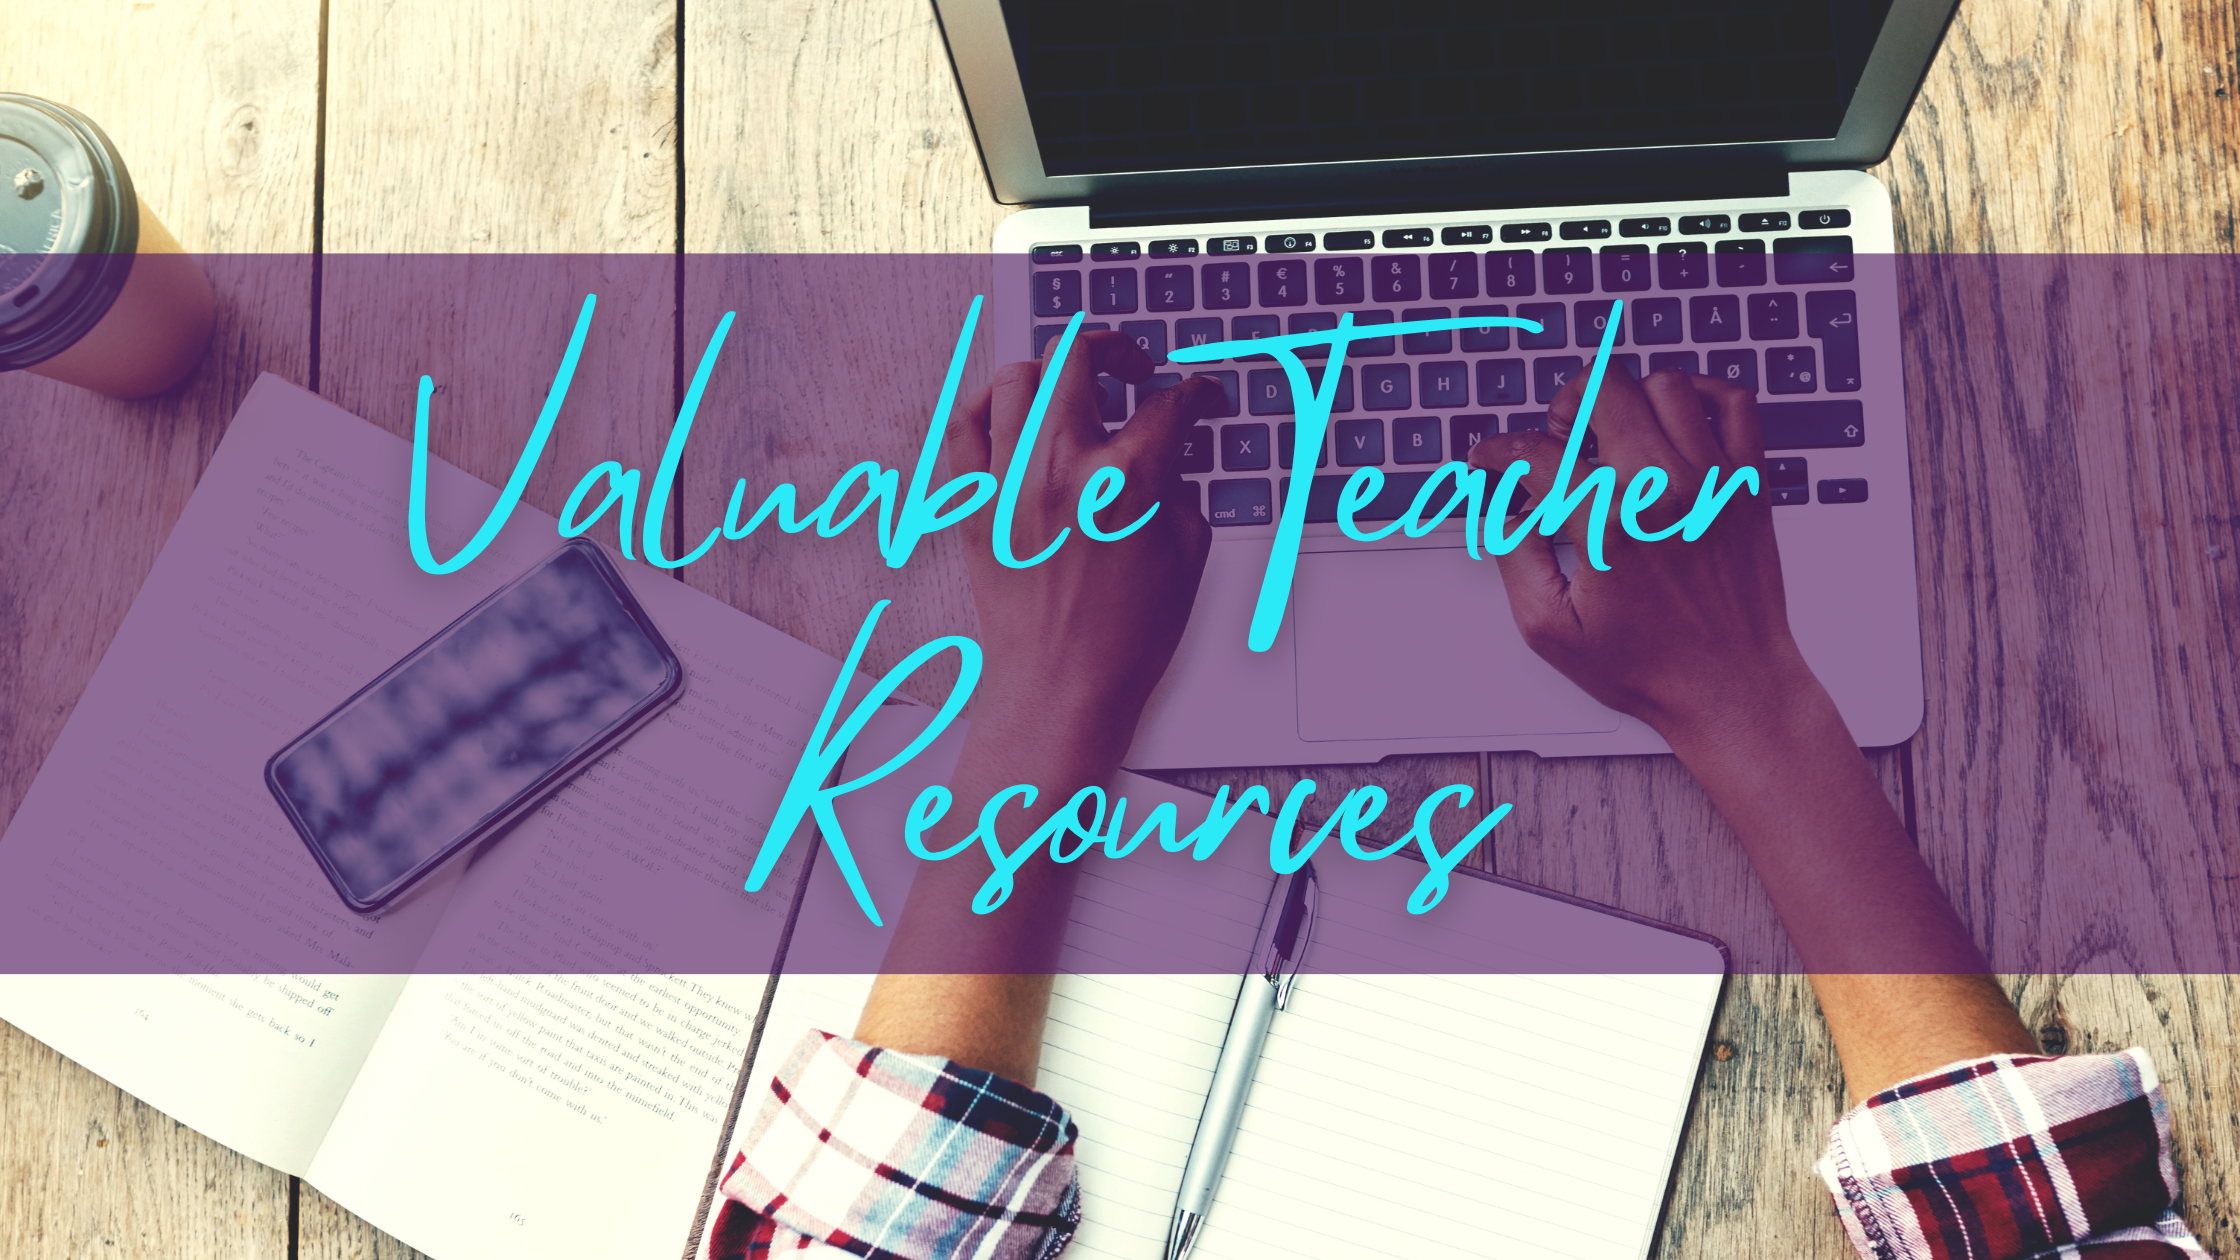 Valuable Teacher Resources Banner hands on a laptop.